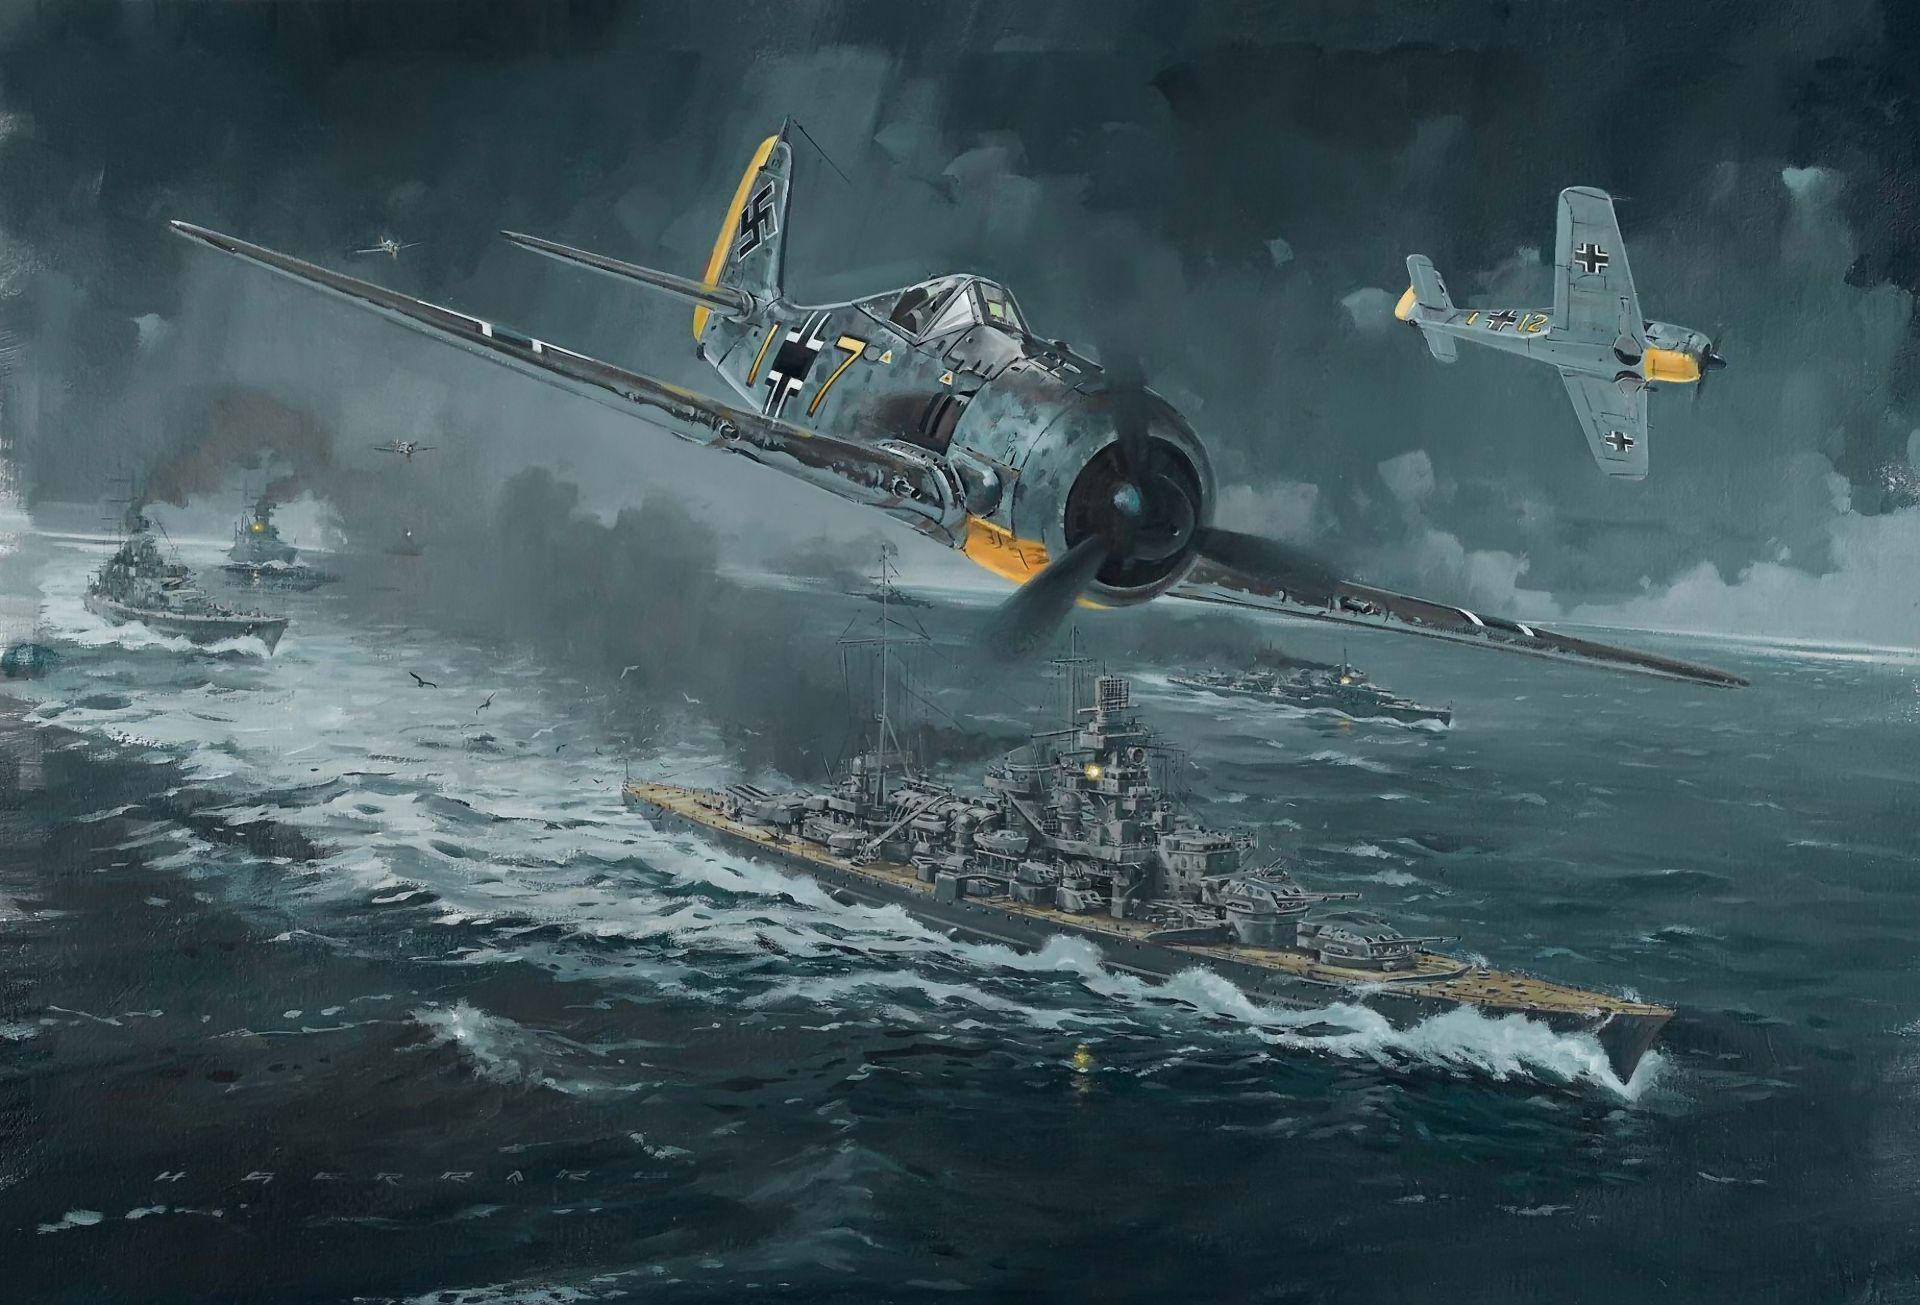 German Ww2 Fighters Over Ships Wallpaper